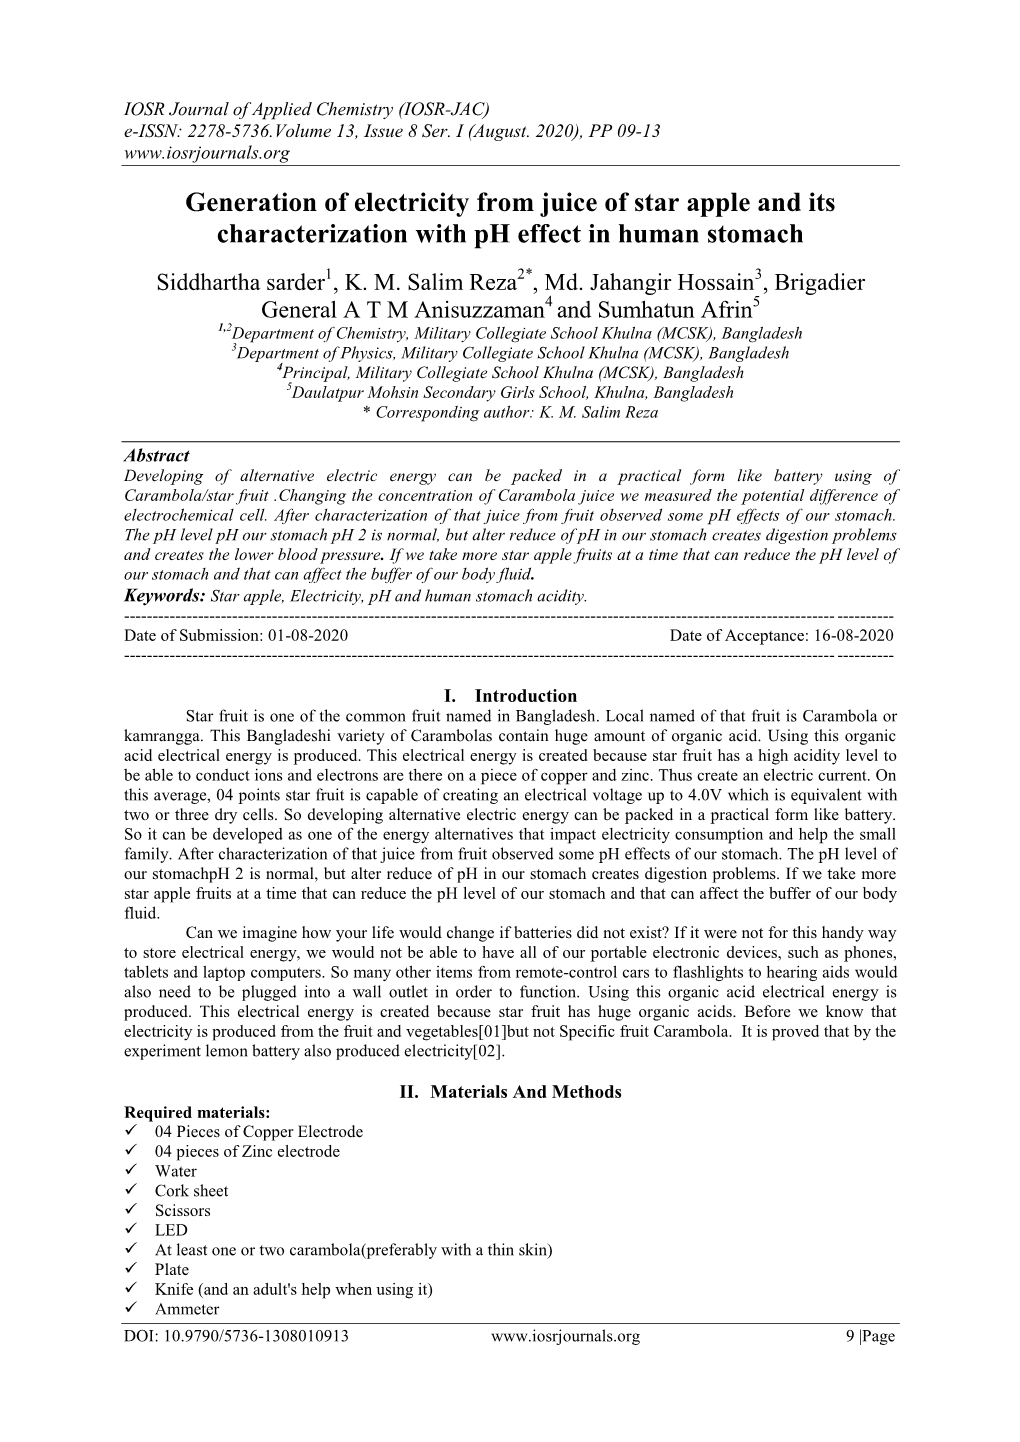 Generation of Electricity from Juice of Star Apple and Its Characterization with Ph Effect in Human Stomach